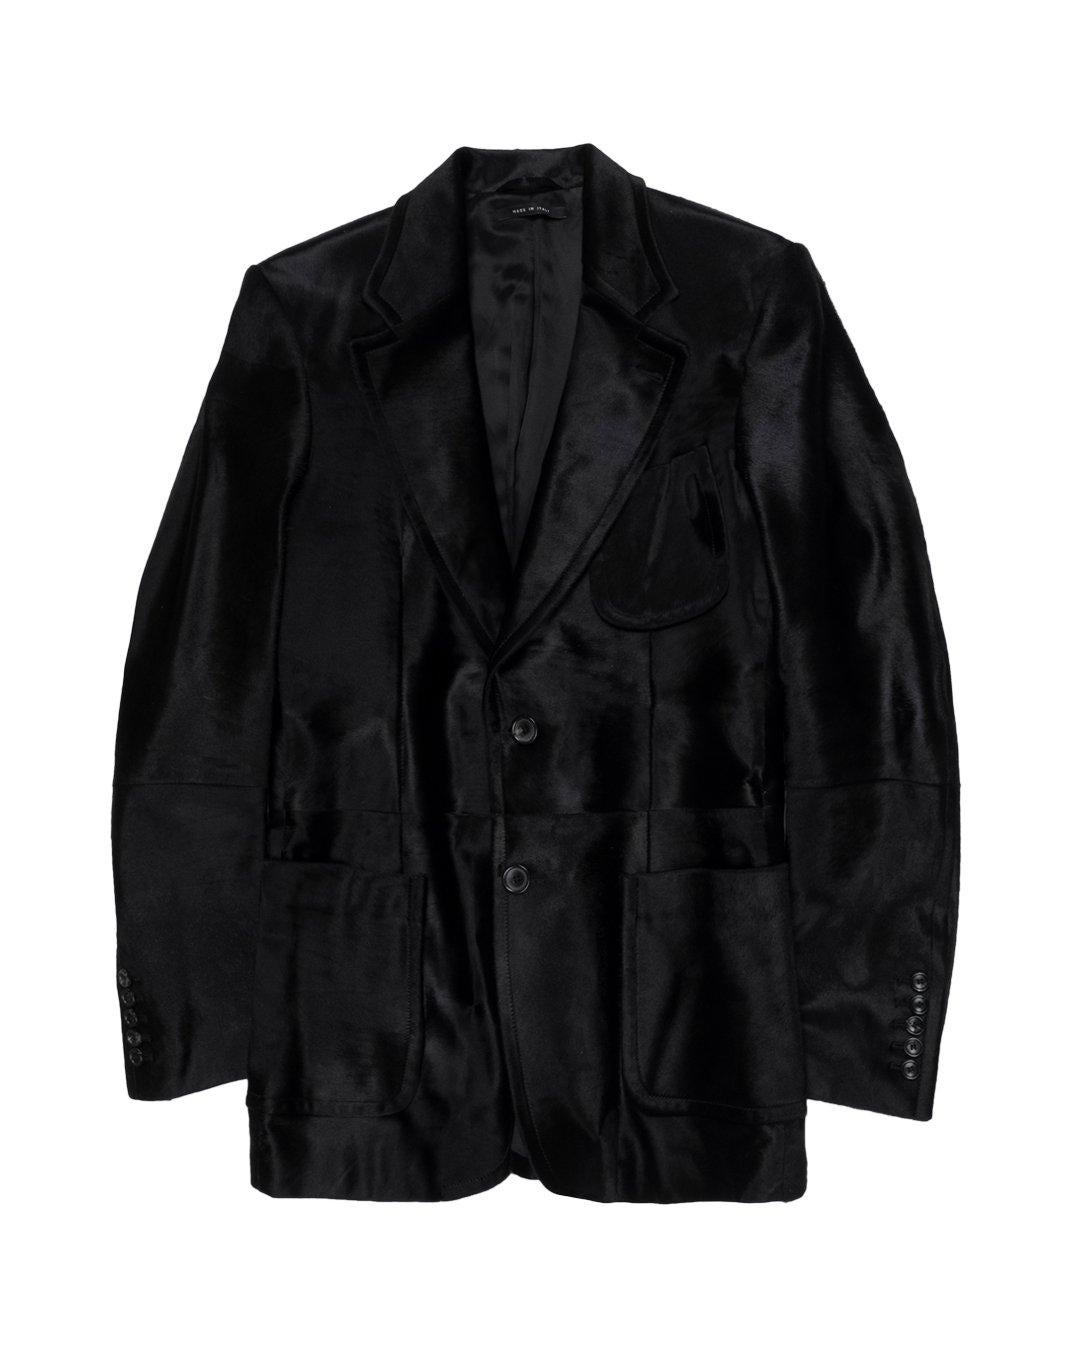 Men's Gucci AW2005 Pony-Hair Evening Jacket For Sale